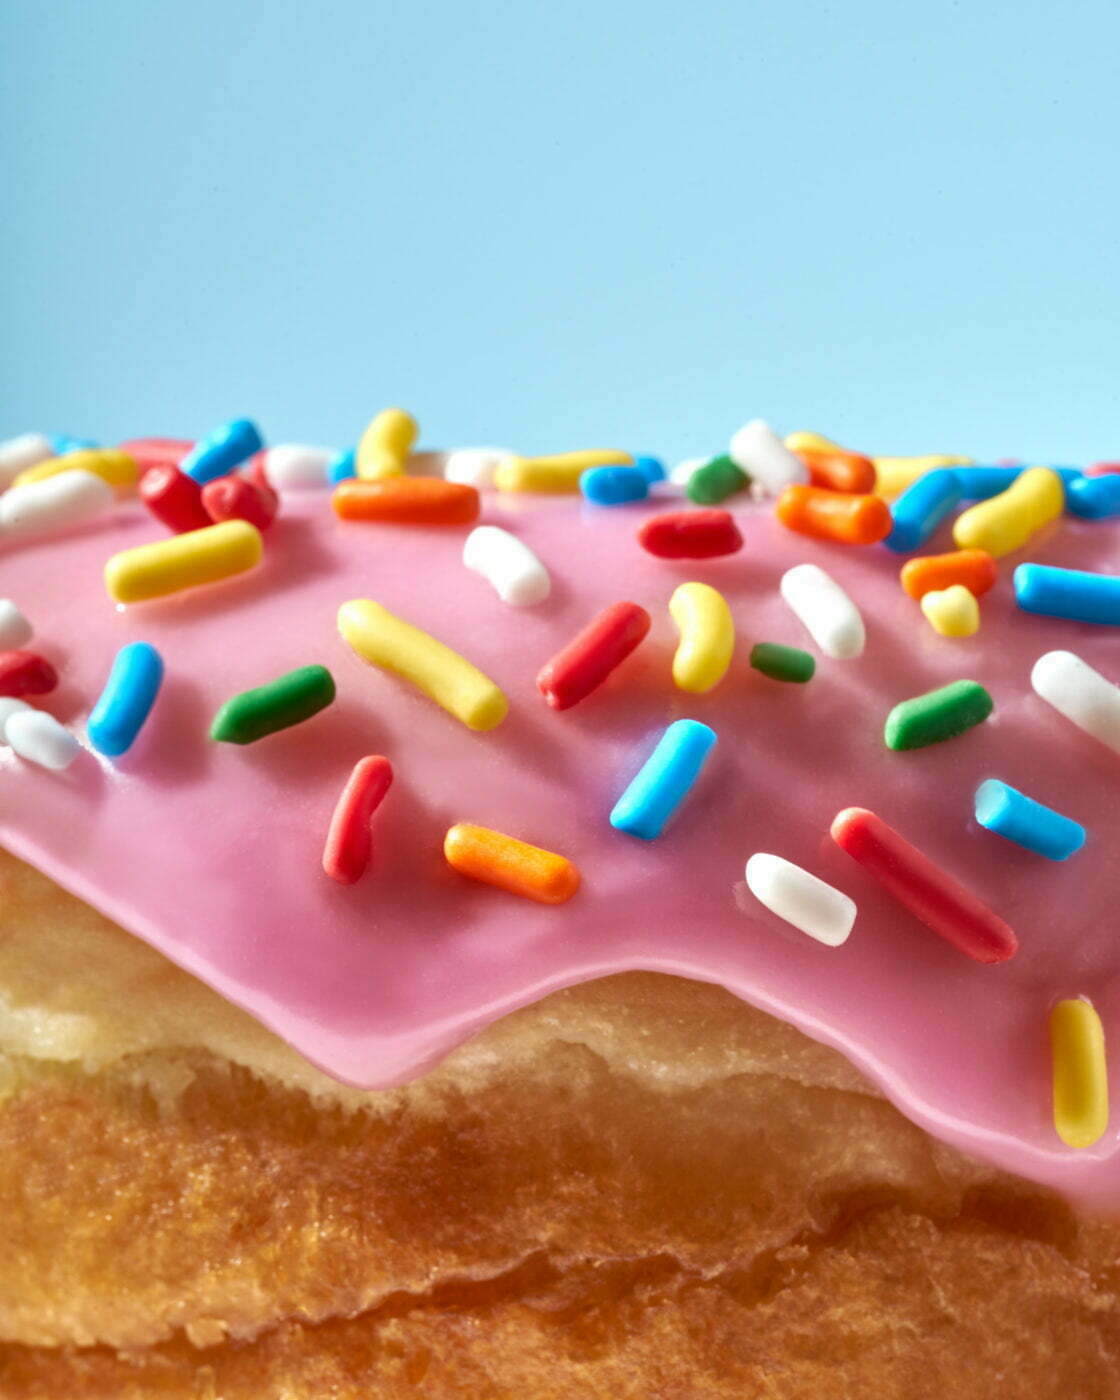 Close-up of a pink raised donut covered in rainbow sprinkles against a sky blue background.